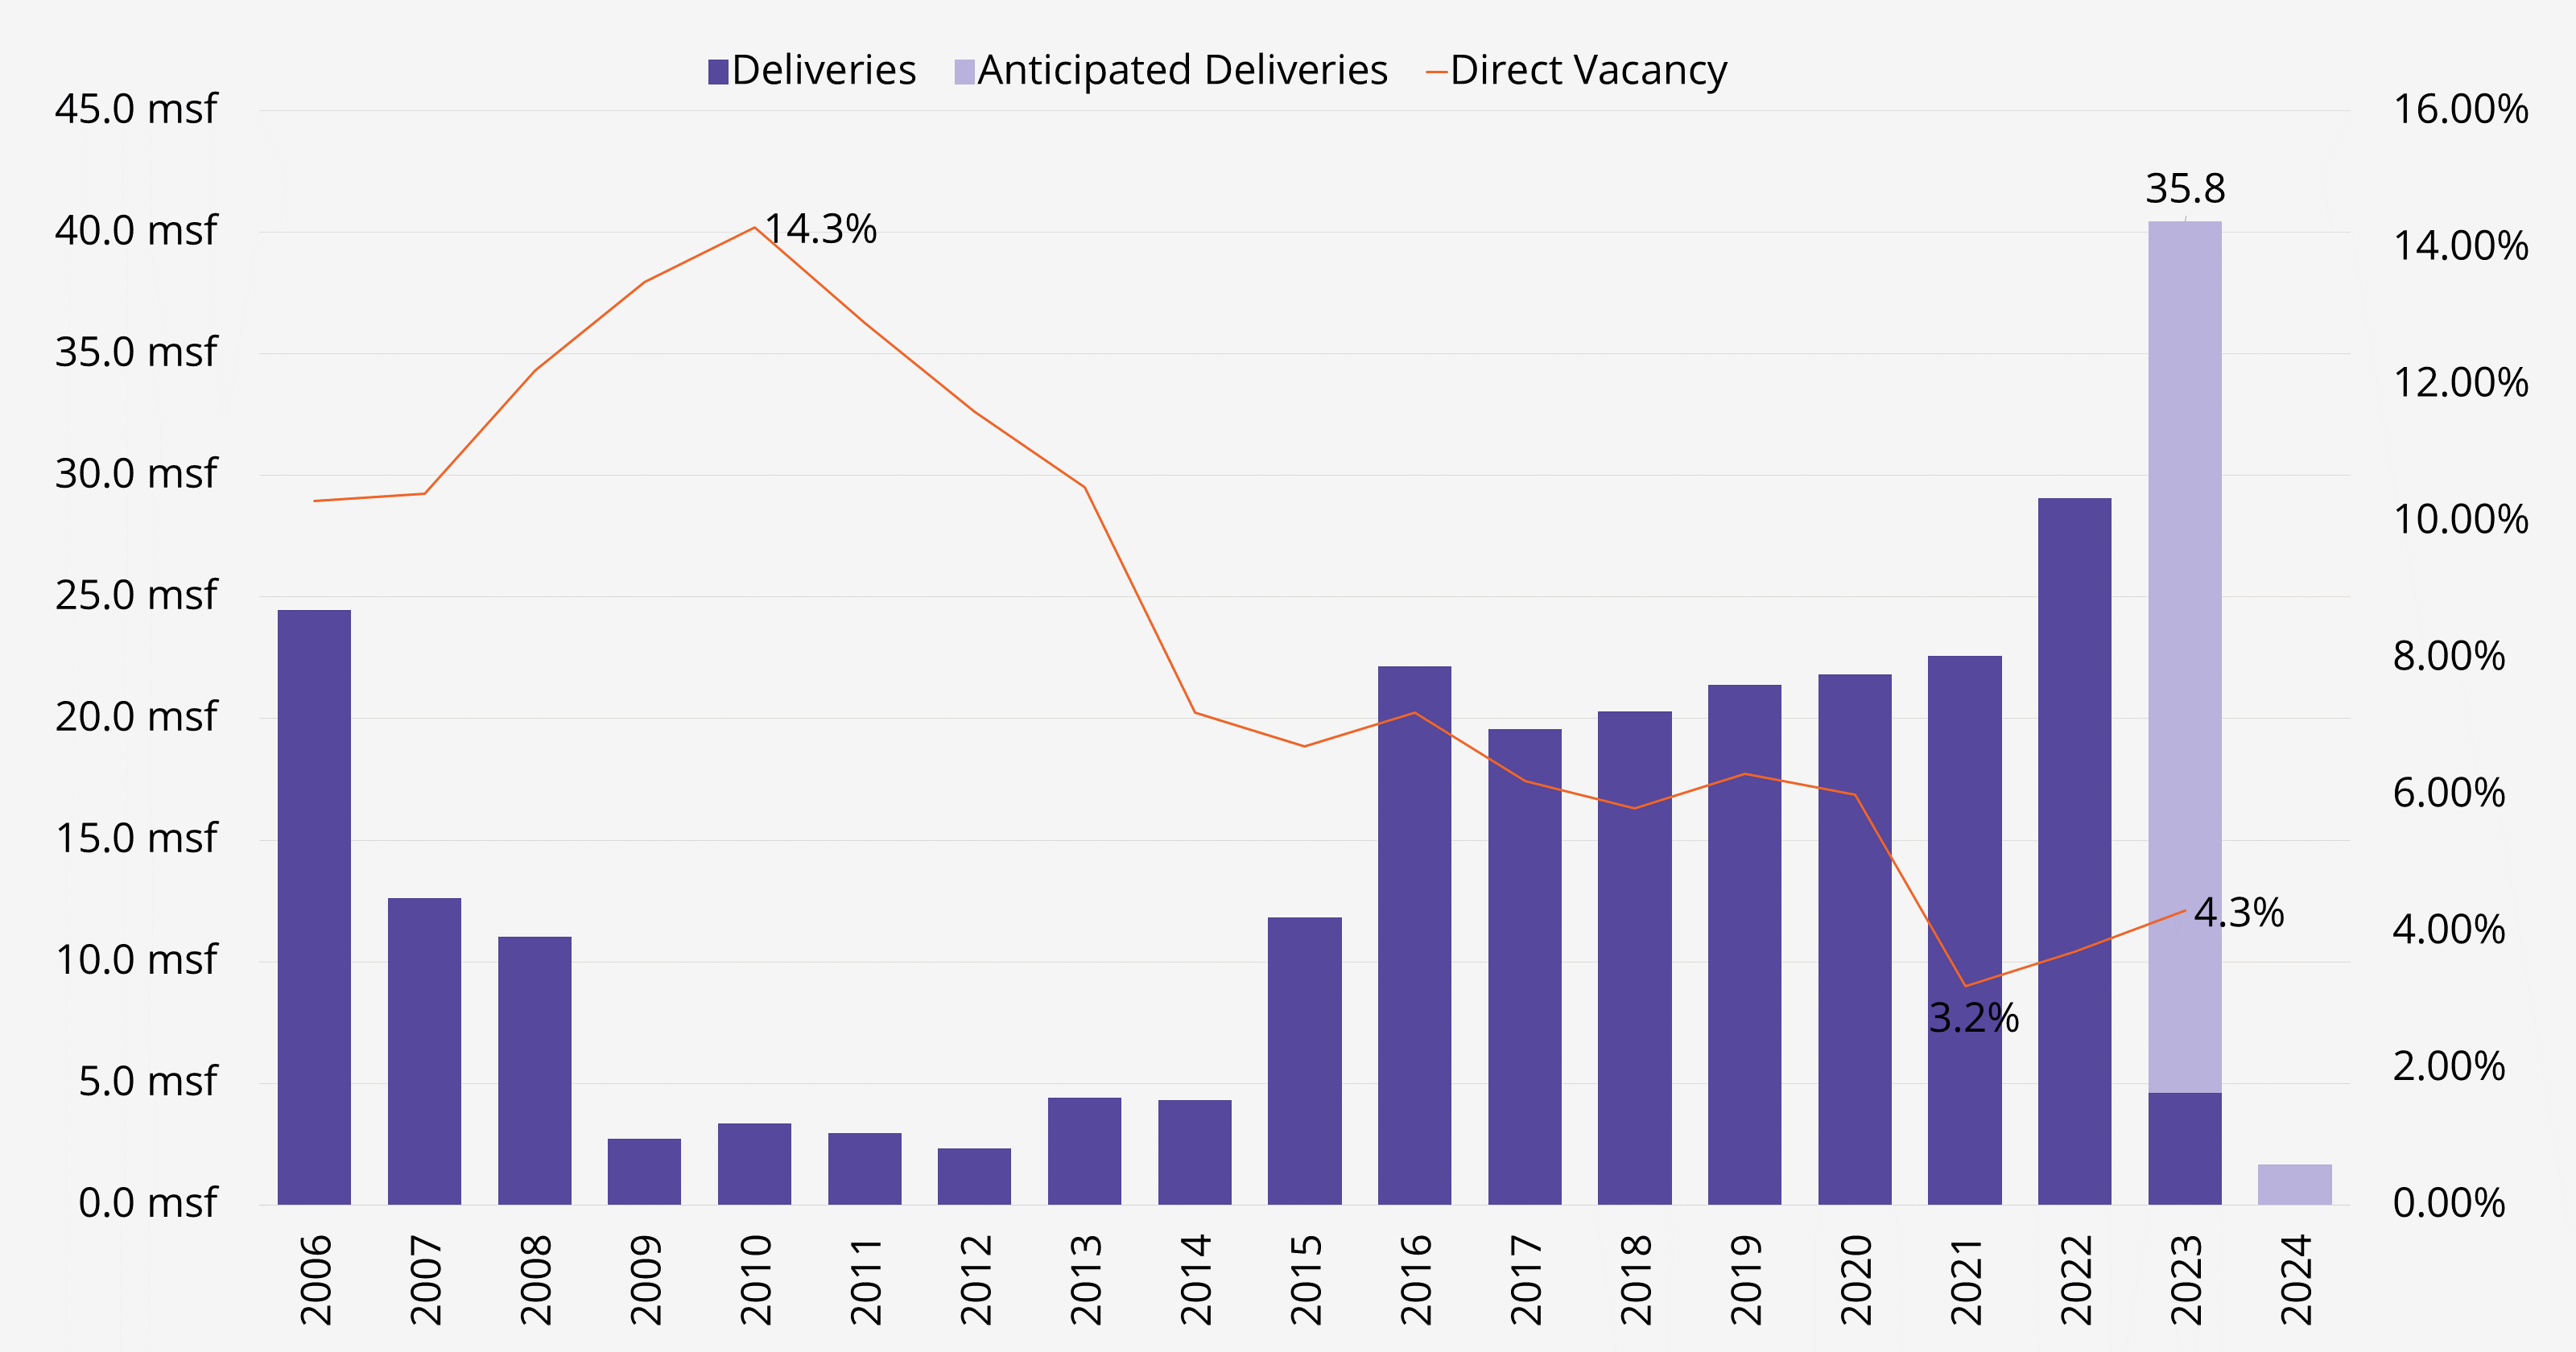 graph of deliveries and direct vacancy in commercial real estate industrial space from 2006-2024 in Atlanta, Georgia